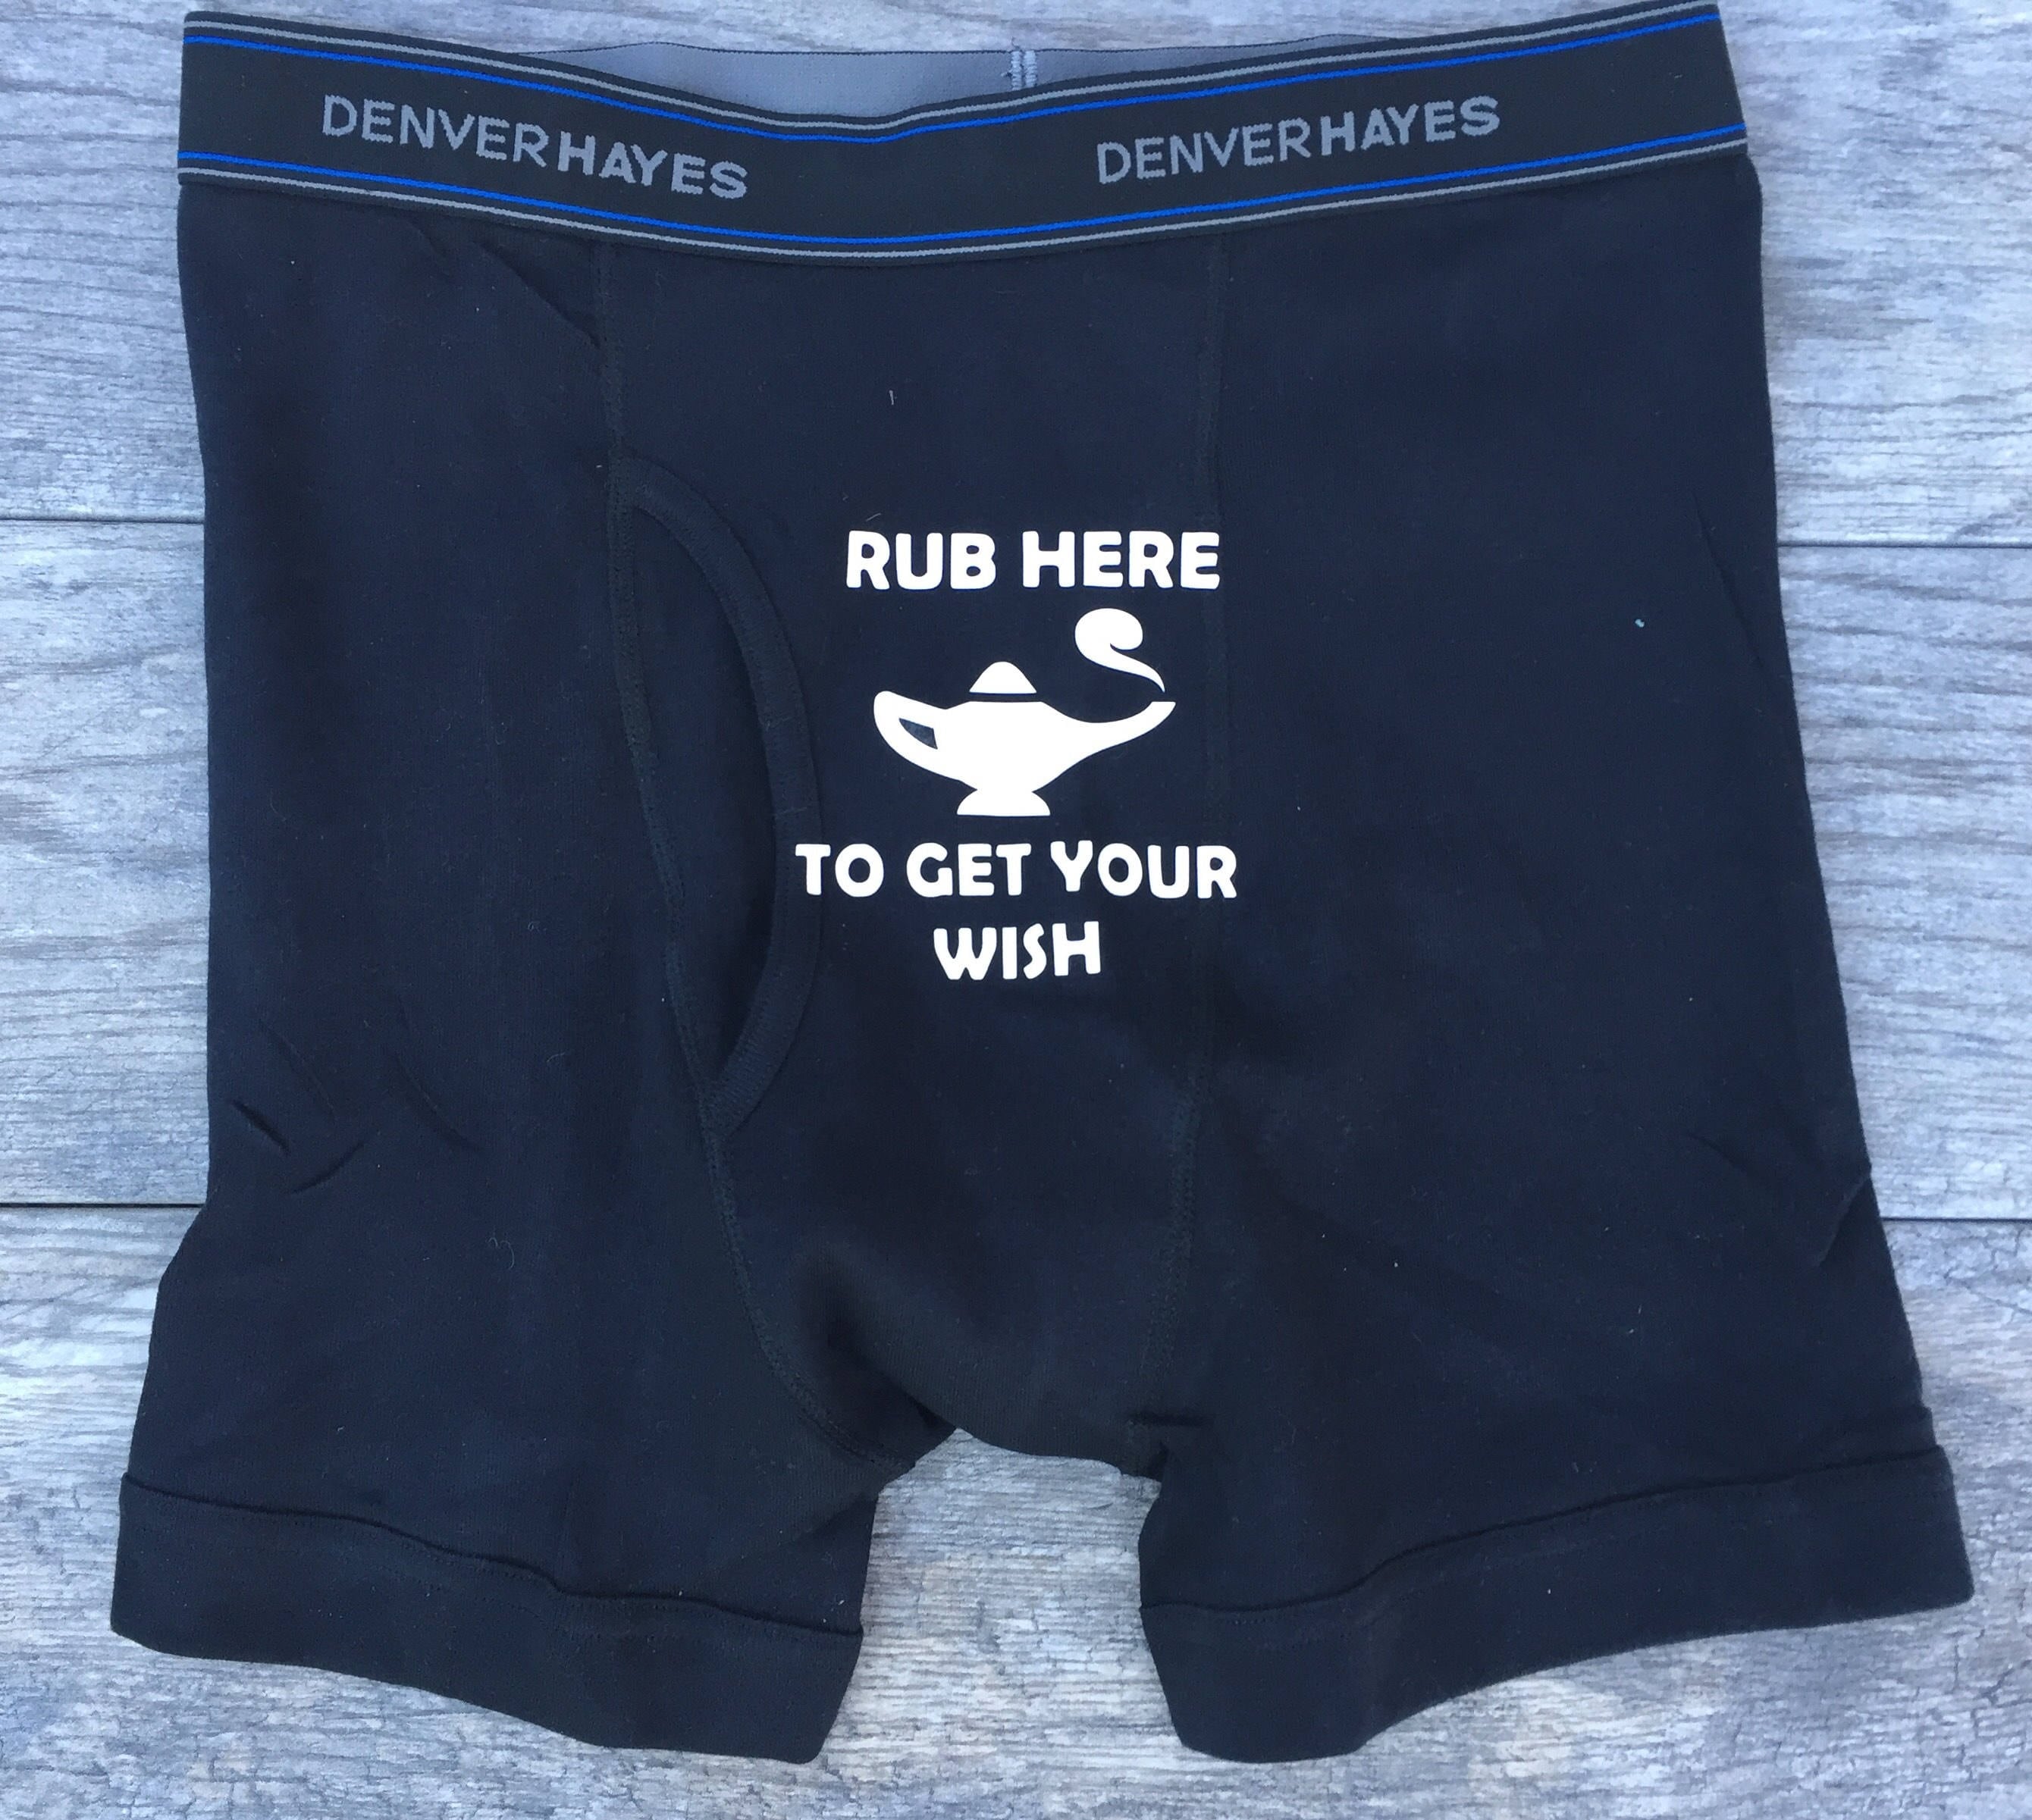 Gag Gift, Shartwear Pre-stained Underwear, Funny Gift for Friend, Poop Stain  Underpants, Fun Gift, White Elephant, Humor Gift, Shit Happens 